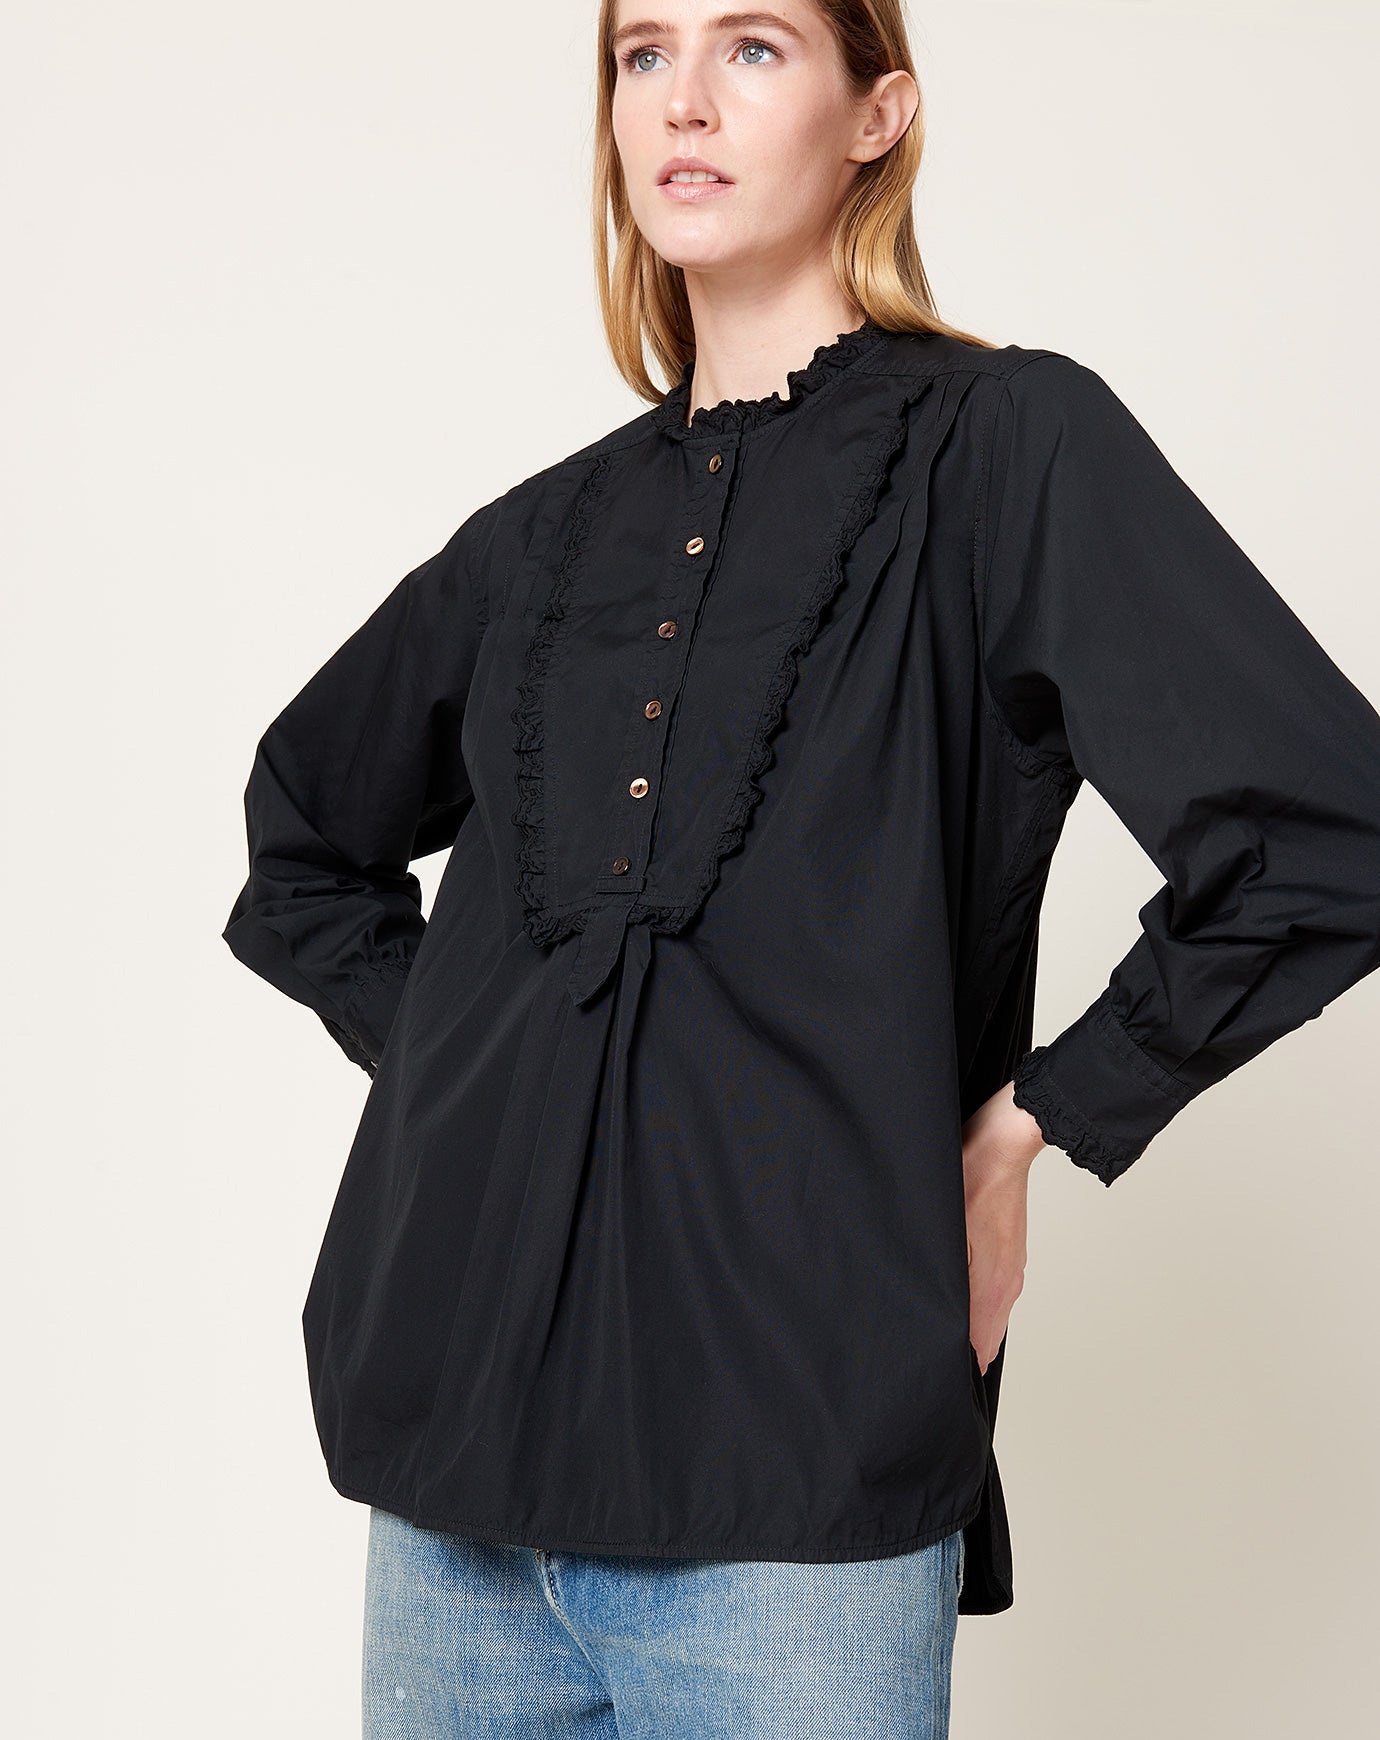 A'Court Charlotte Blouse in Black